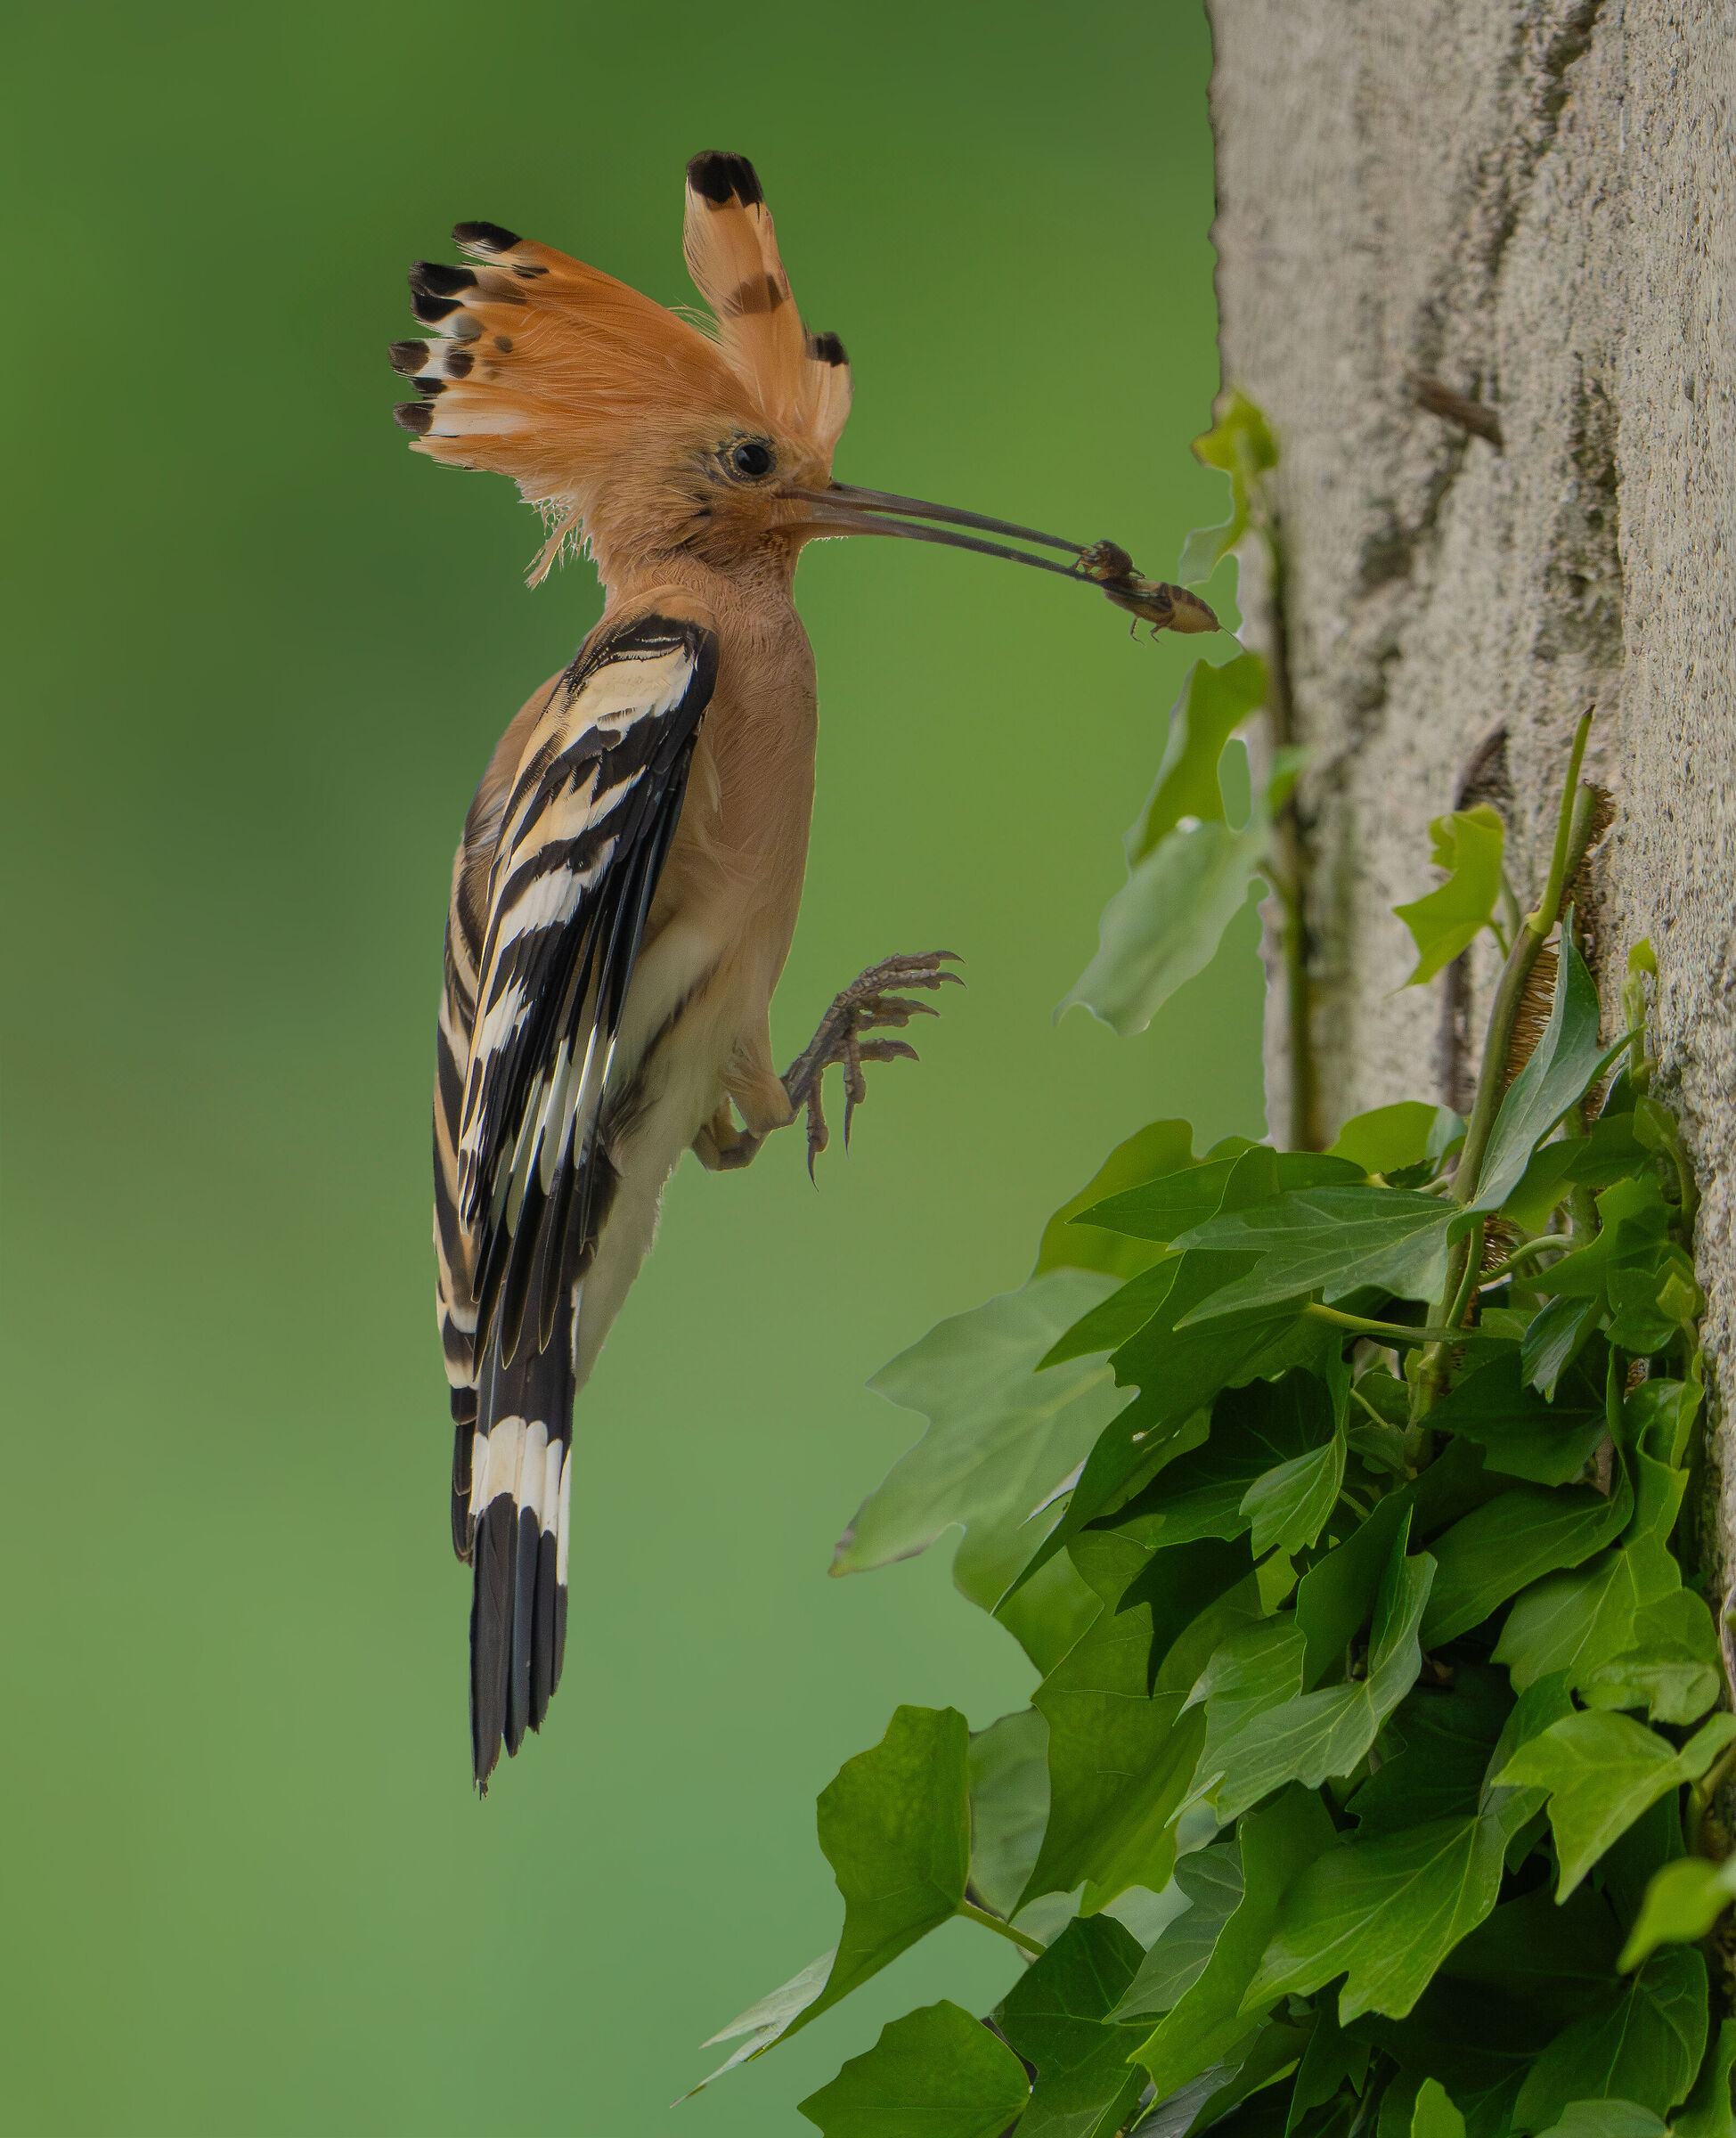 hoopoe on its way to the nest...